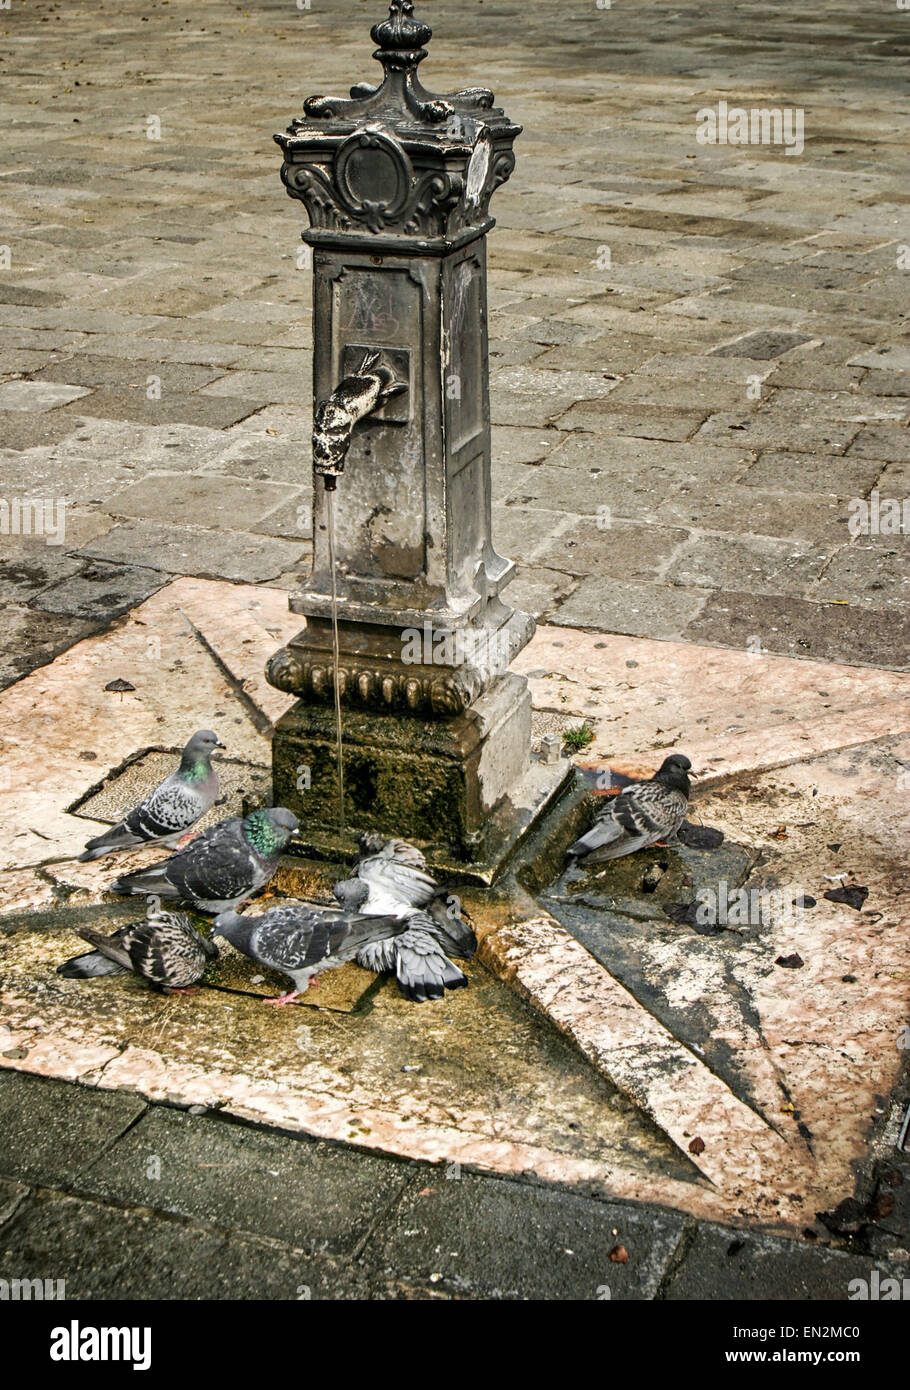 Venice, Province of Venice, ITALY. 7th Oct, 2004. Pigeons drink from water discharged from the communal water tap, a historical relic from the past, in the Campo del Nuovo Ghetto in Venice. A UNESCO World Heritage Site, Venice is one of the most popular international tourist destinations. © Arnold Drapkin/ZUMA Wire/Alamy Live News Stock Photo